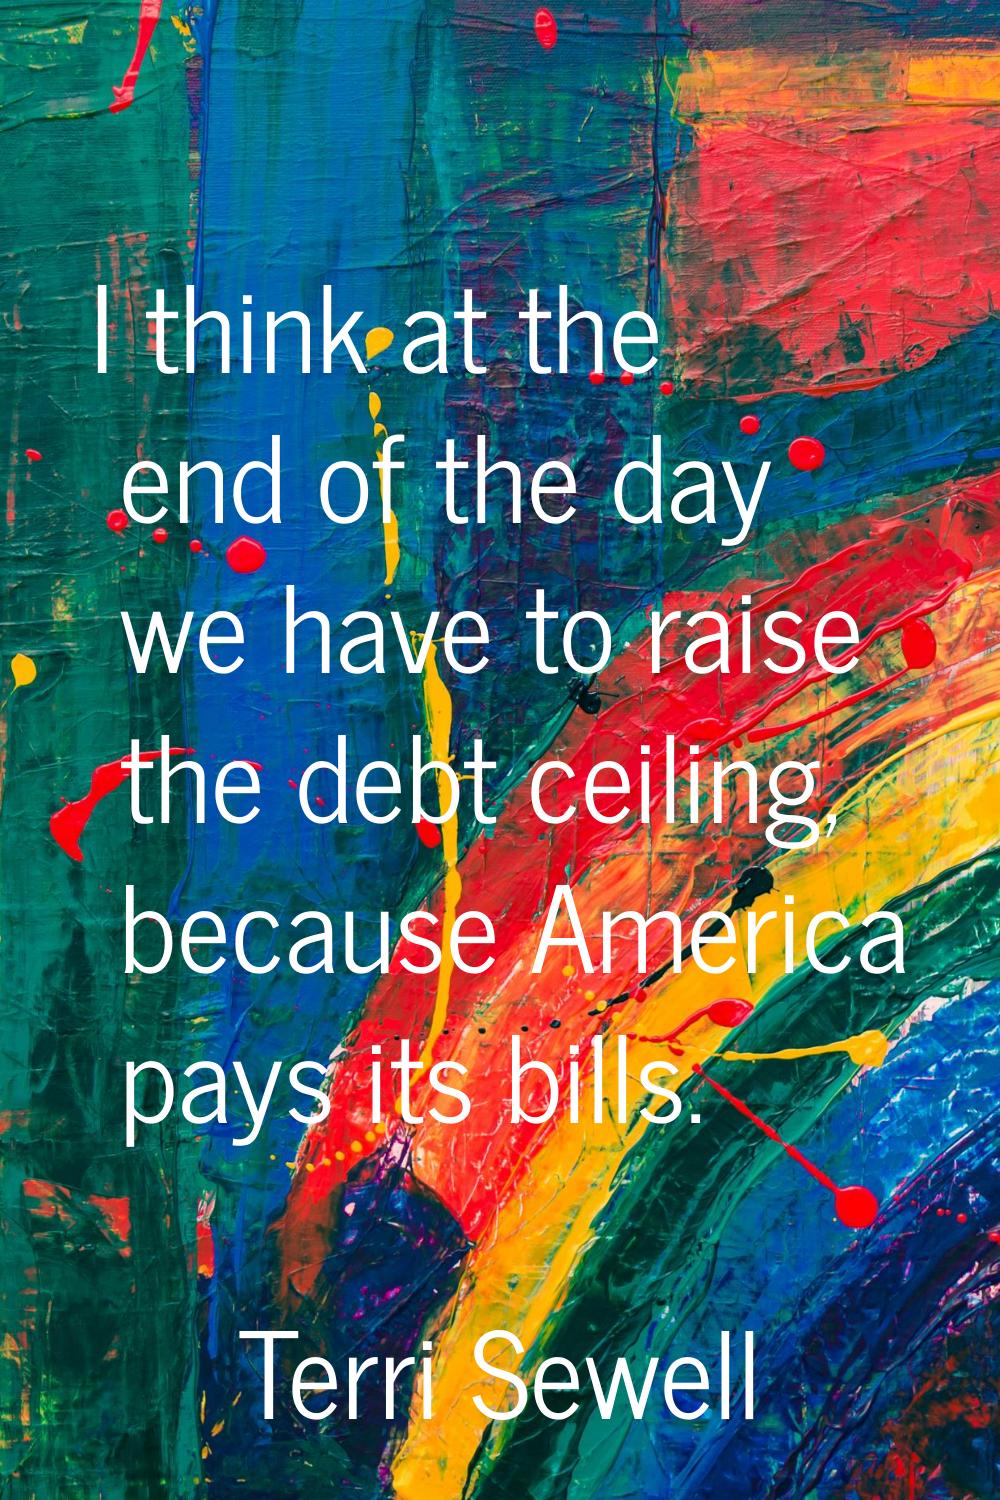 I think at the end of the day we have to raise the debt ceiling, because America pays its bills.